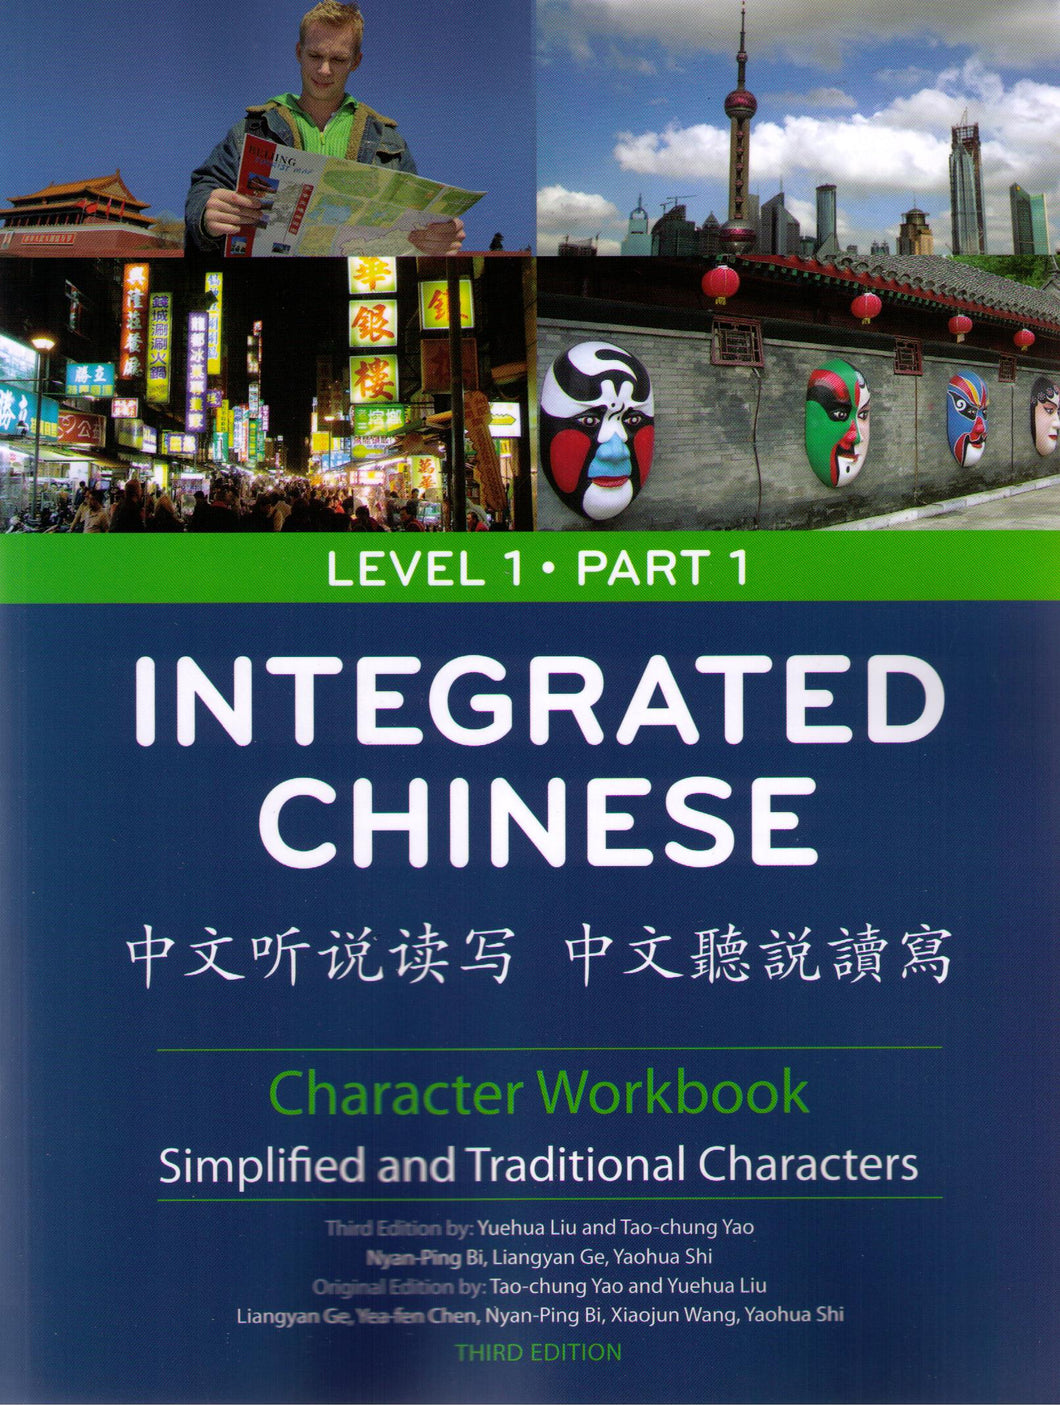 Integrated Chinese Level 1 Part 1-3rd Edition Character Workbook中文聽說讀寫